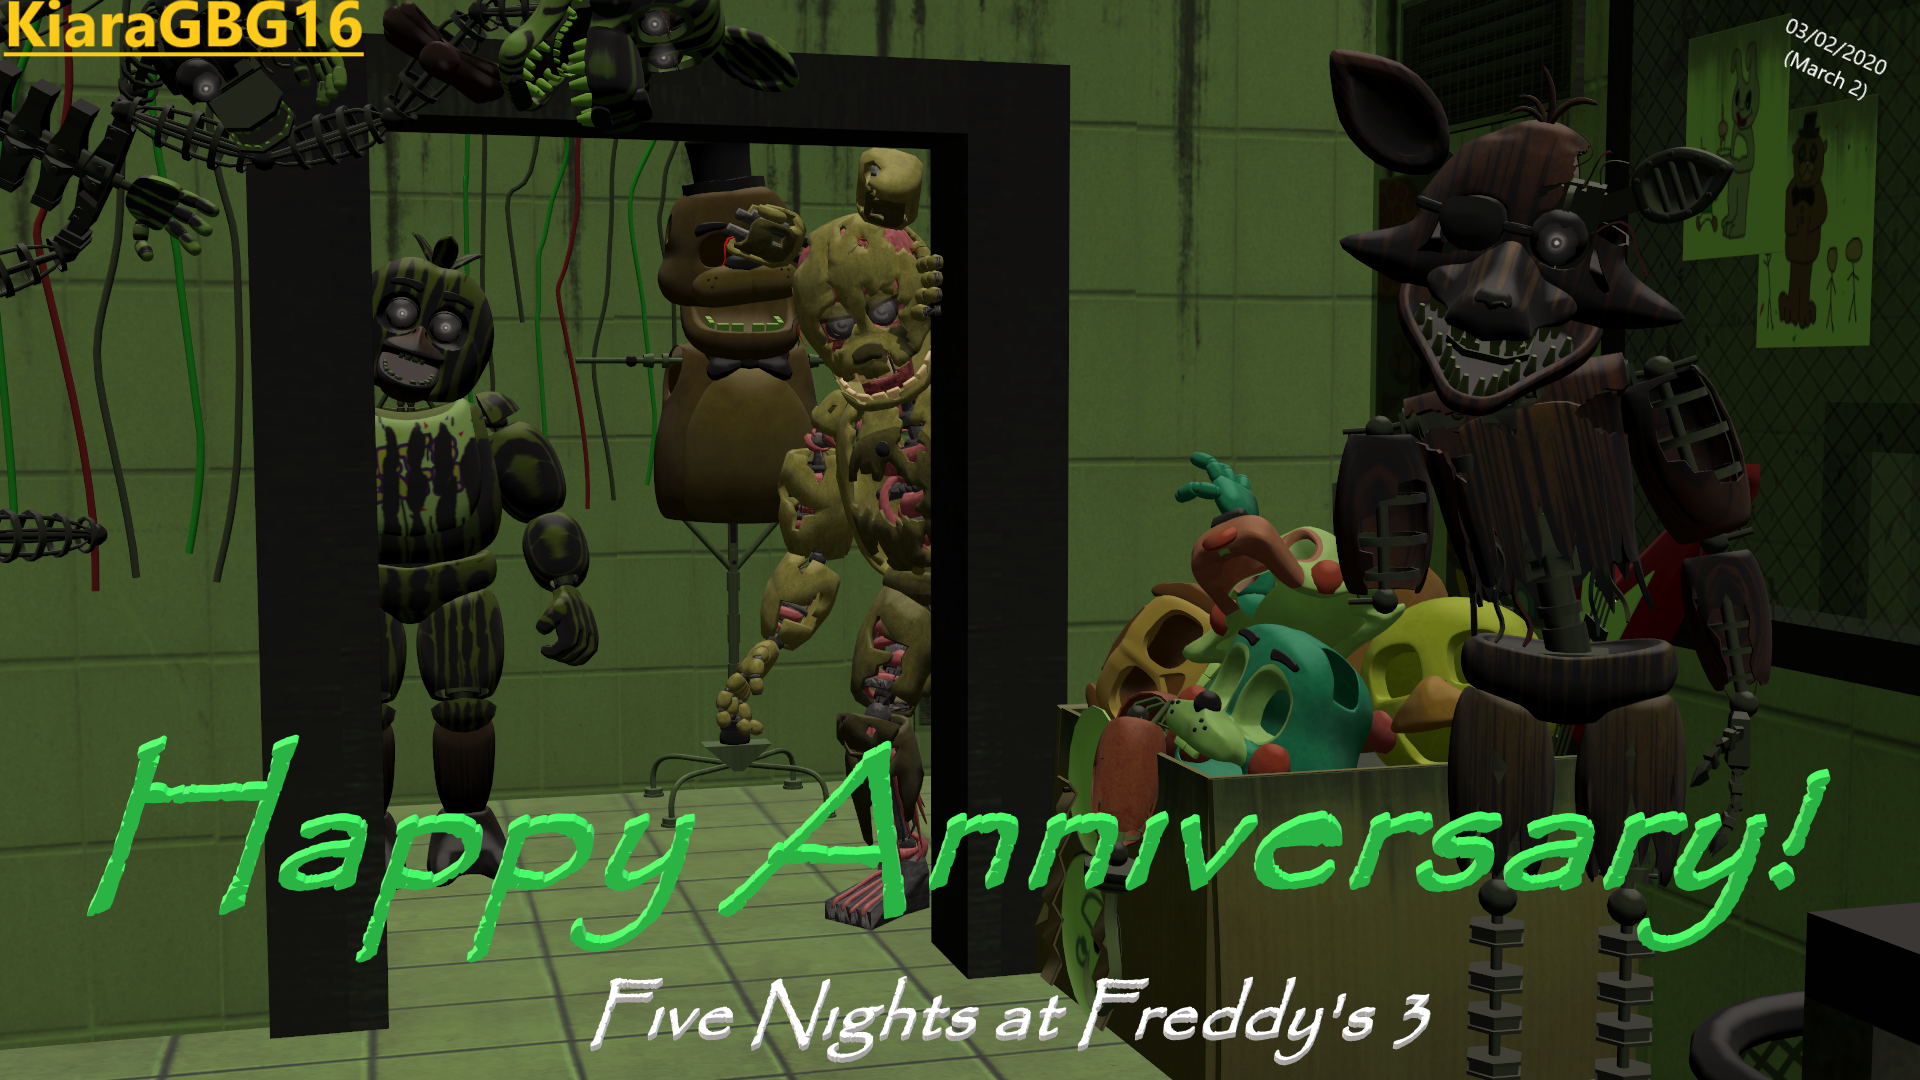 Anniversary of Five Nights at Freddy's 3 (March 3) by KiaraGBG16 on  DeviantArt